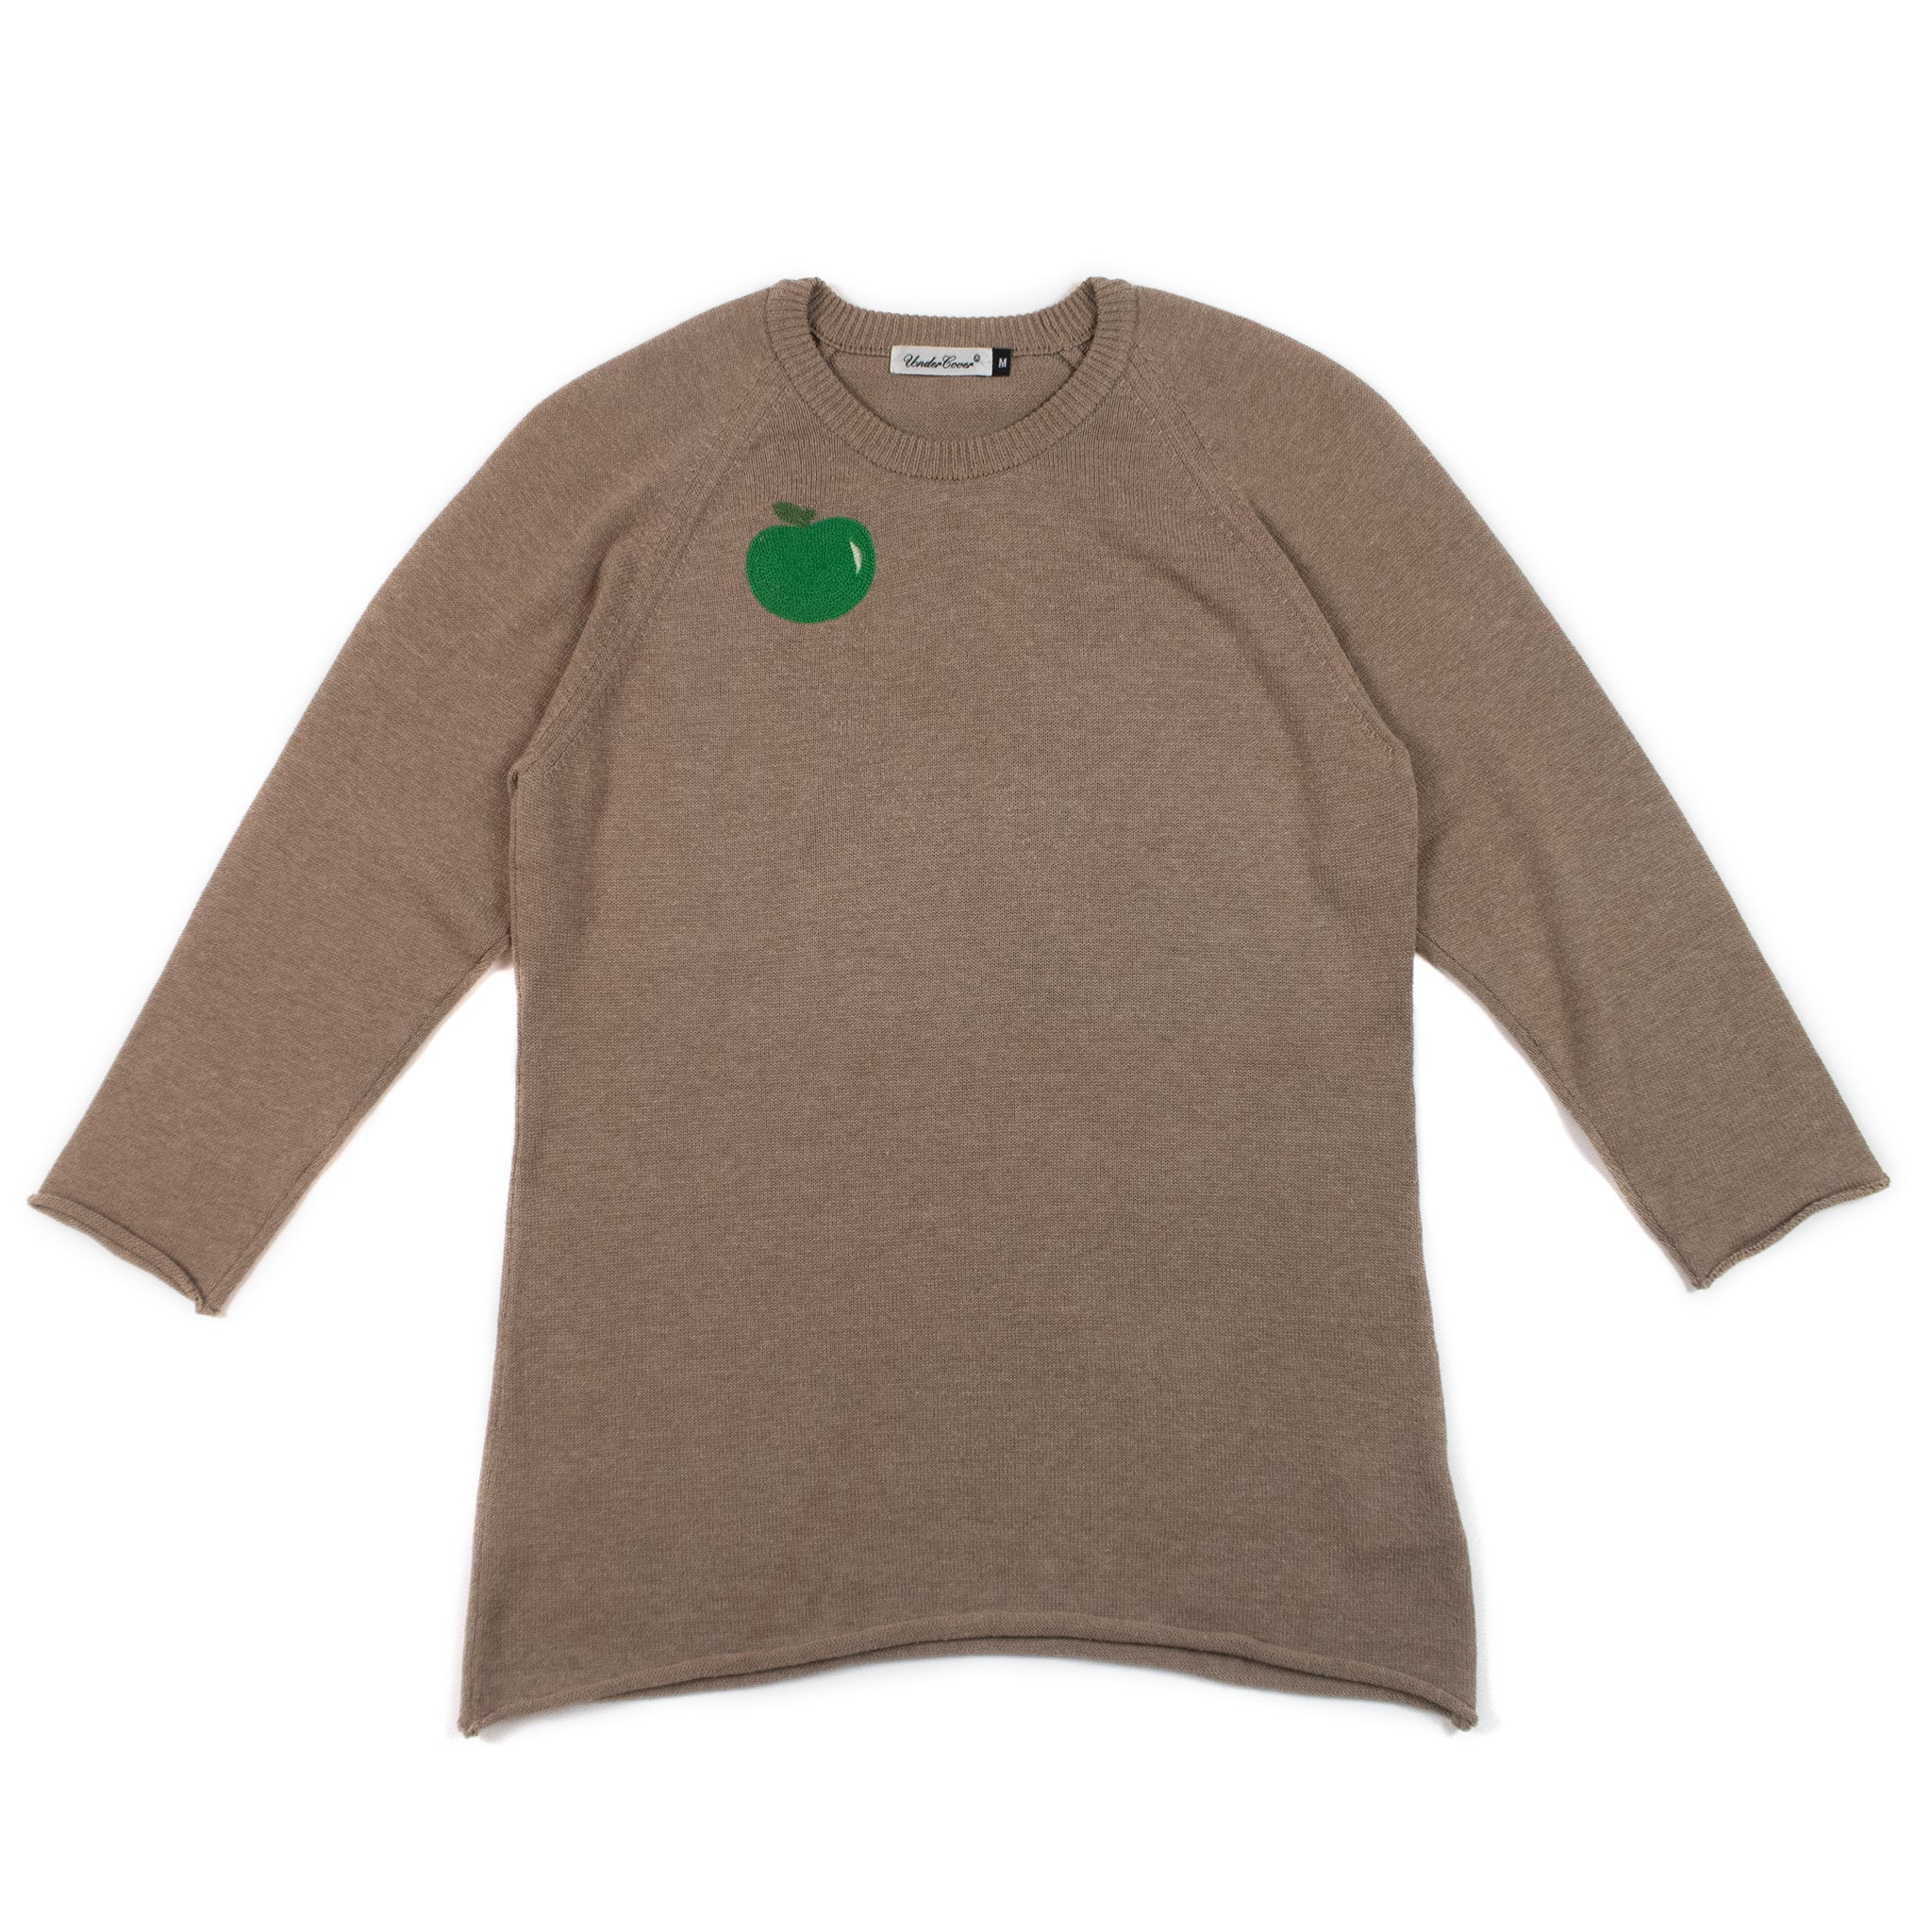 Undercover Under Cover Jun Takahashi Embroidery apple Longsleeve Knit Knitwear